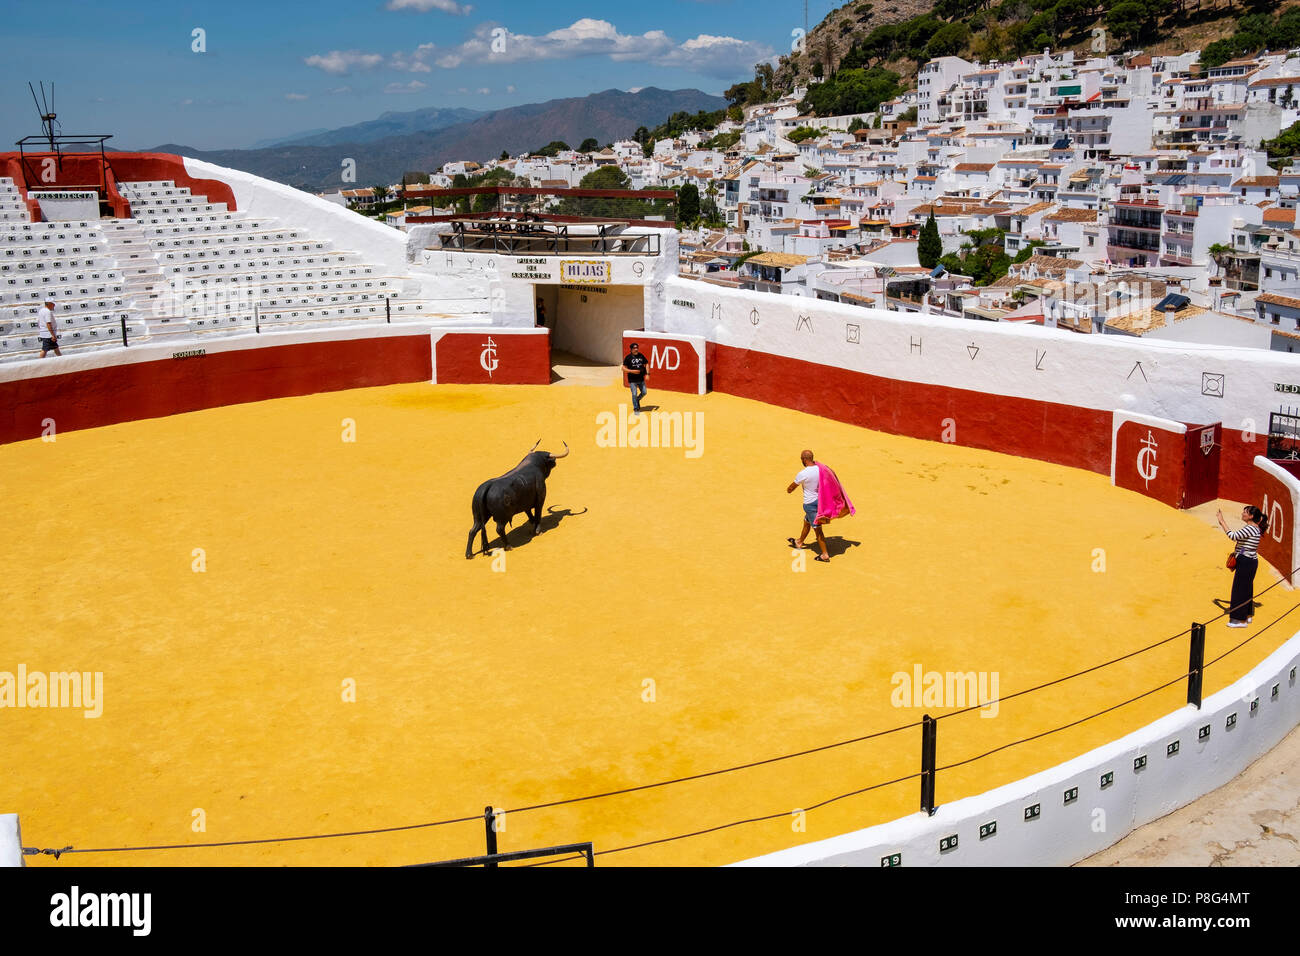 Bullring, typical white village of Mijas. Costa del Sol, Málaga province. Andalusia, Southern Spain Europe Stock Photo